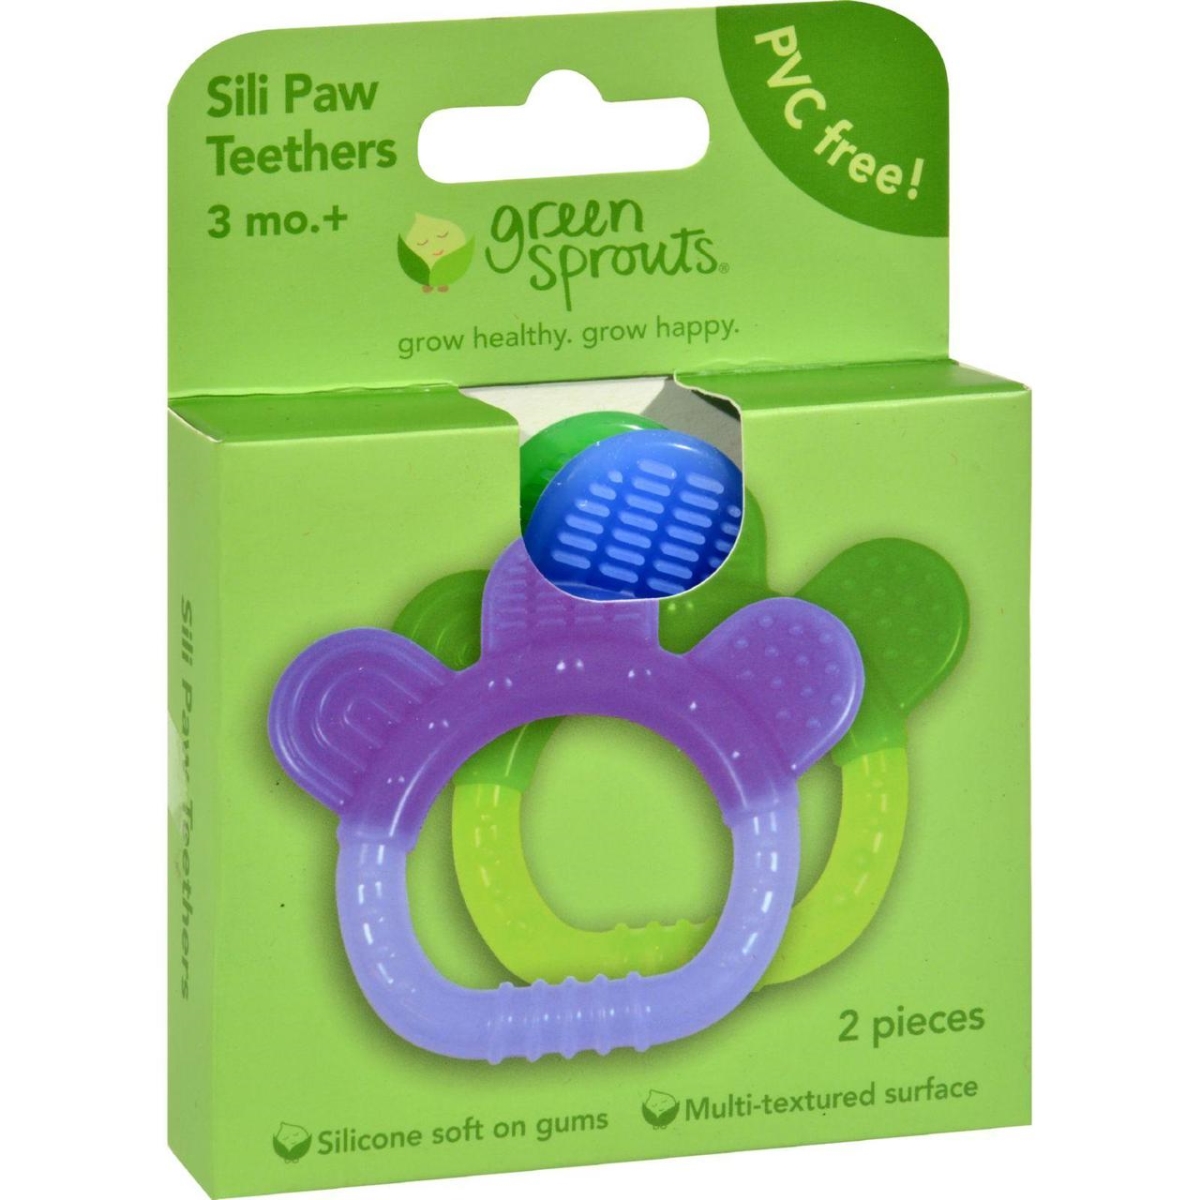 Hg1227651 Sili Paw Teether - 2 Pack Assorted